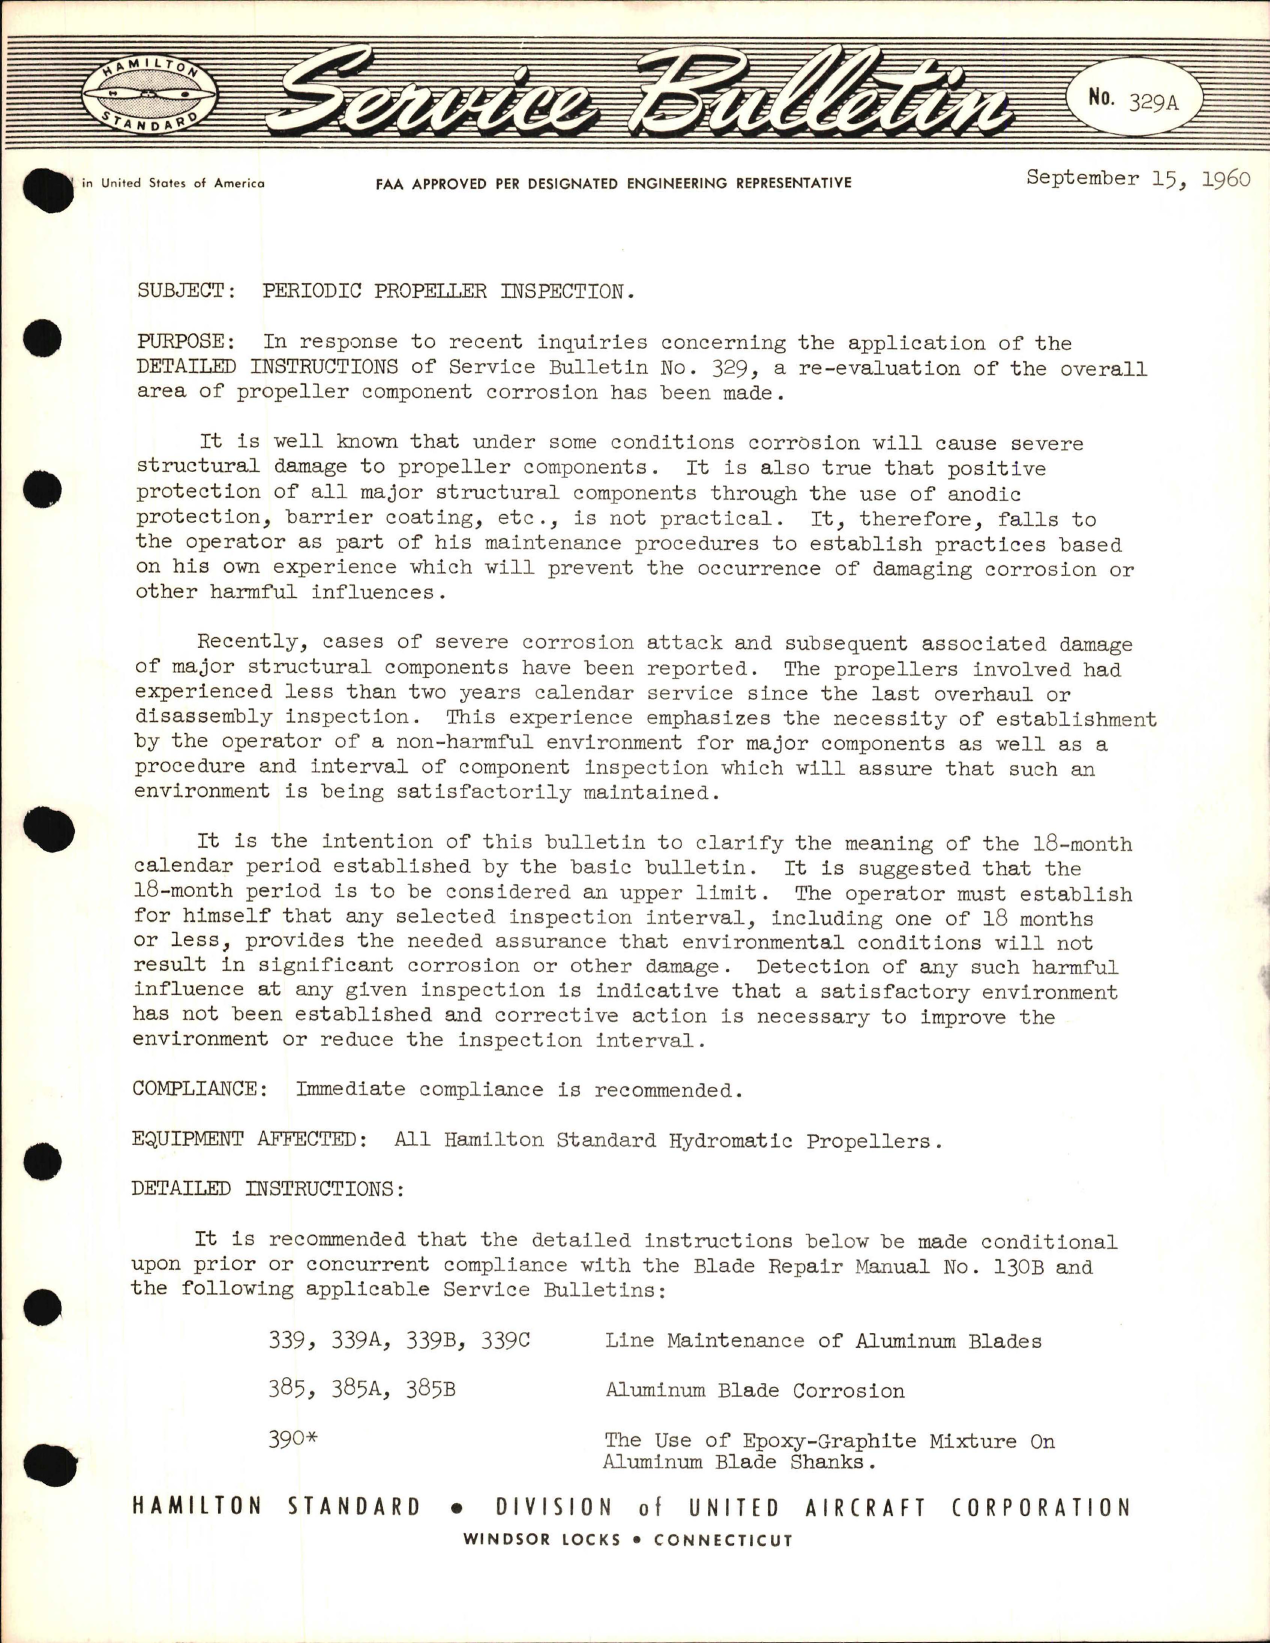 Sample page 1 from AirCorps Library document: Periodic Propeller Inspection 